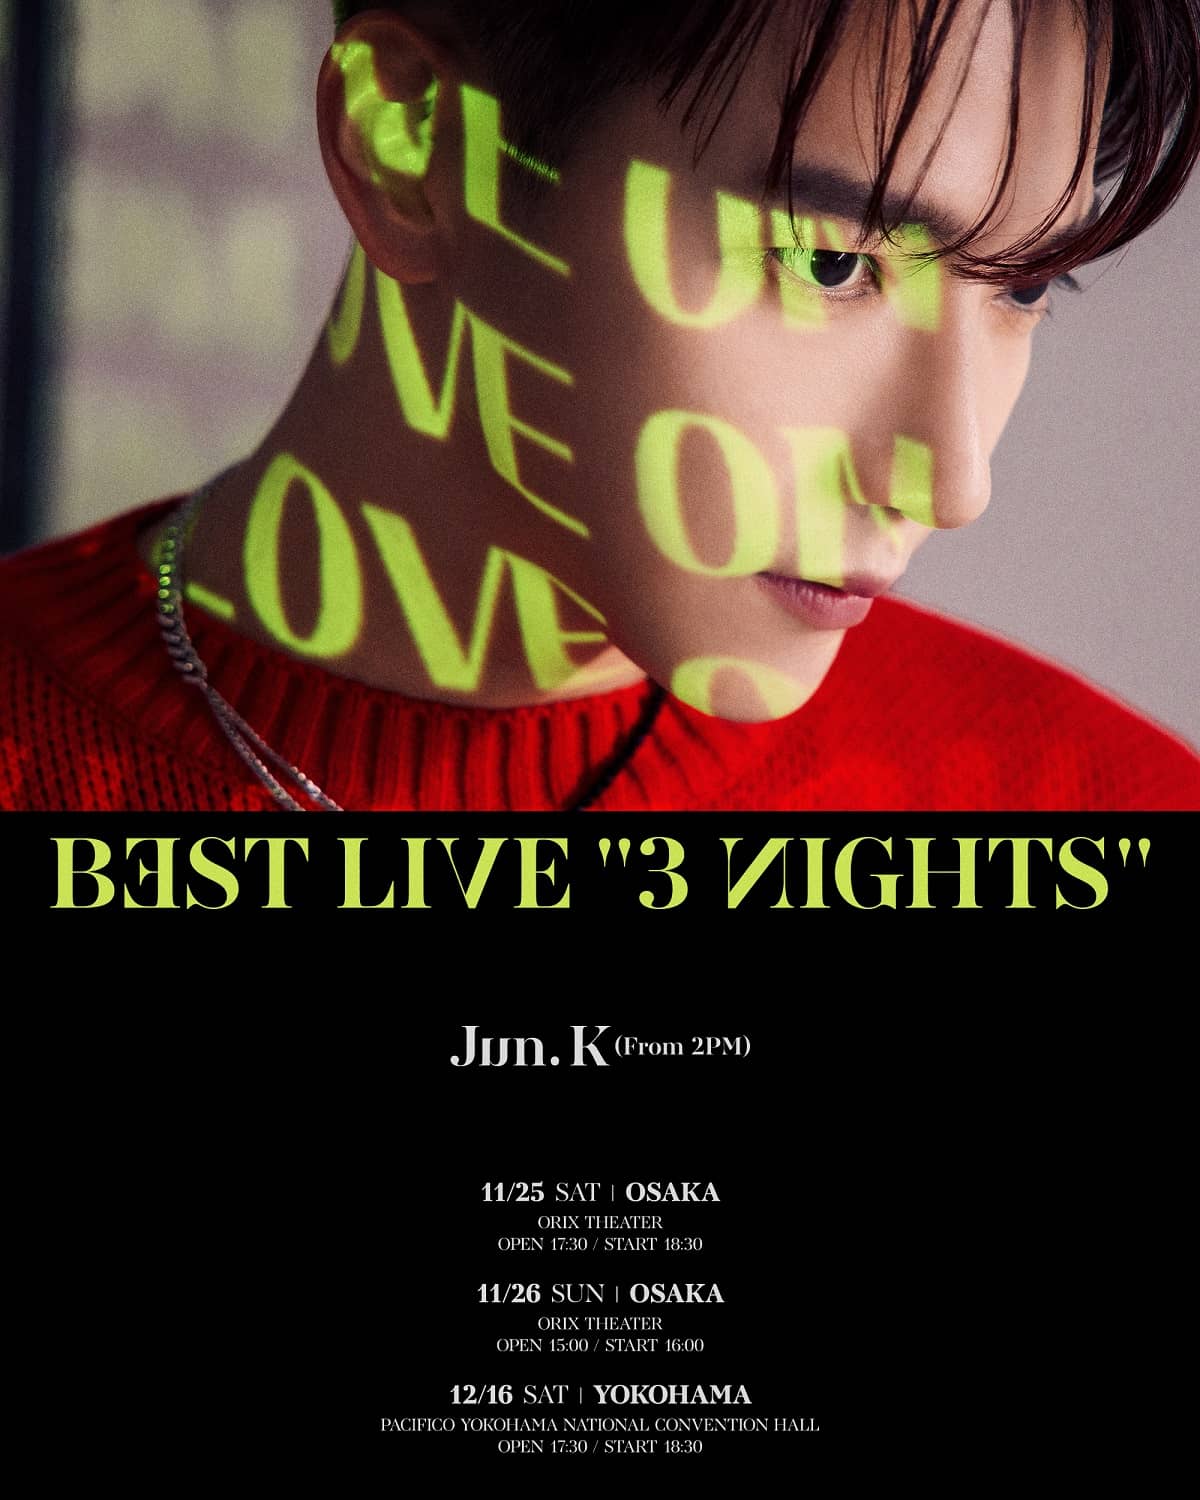 Jun. K (From 2PM) BEST LIVE “3 NIGHTS” Live Viewing